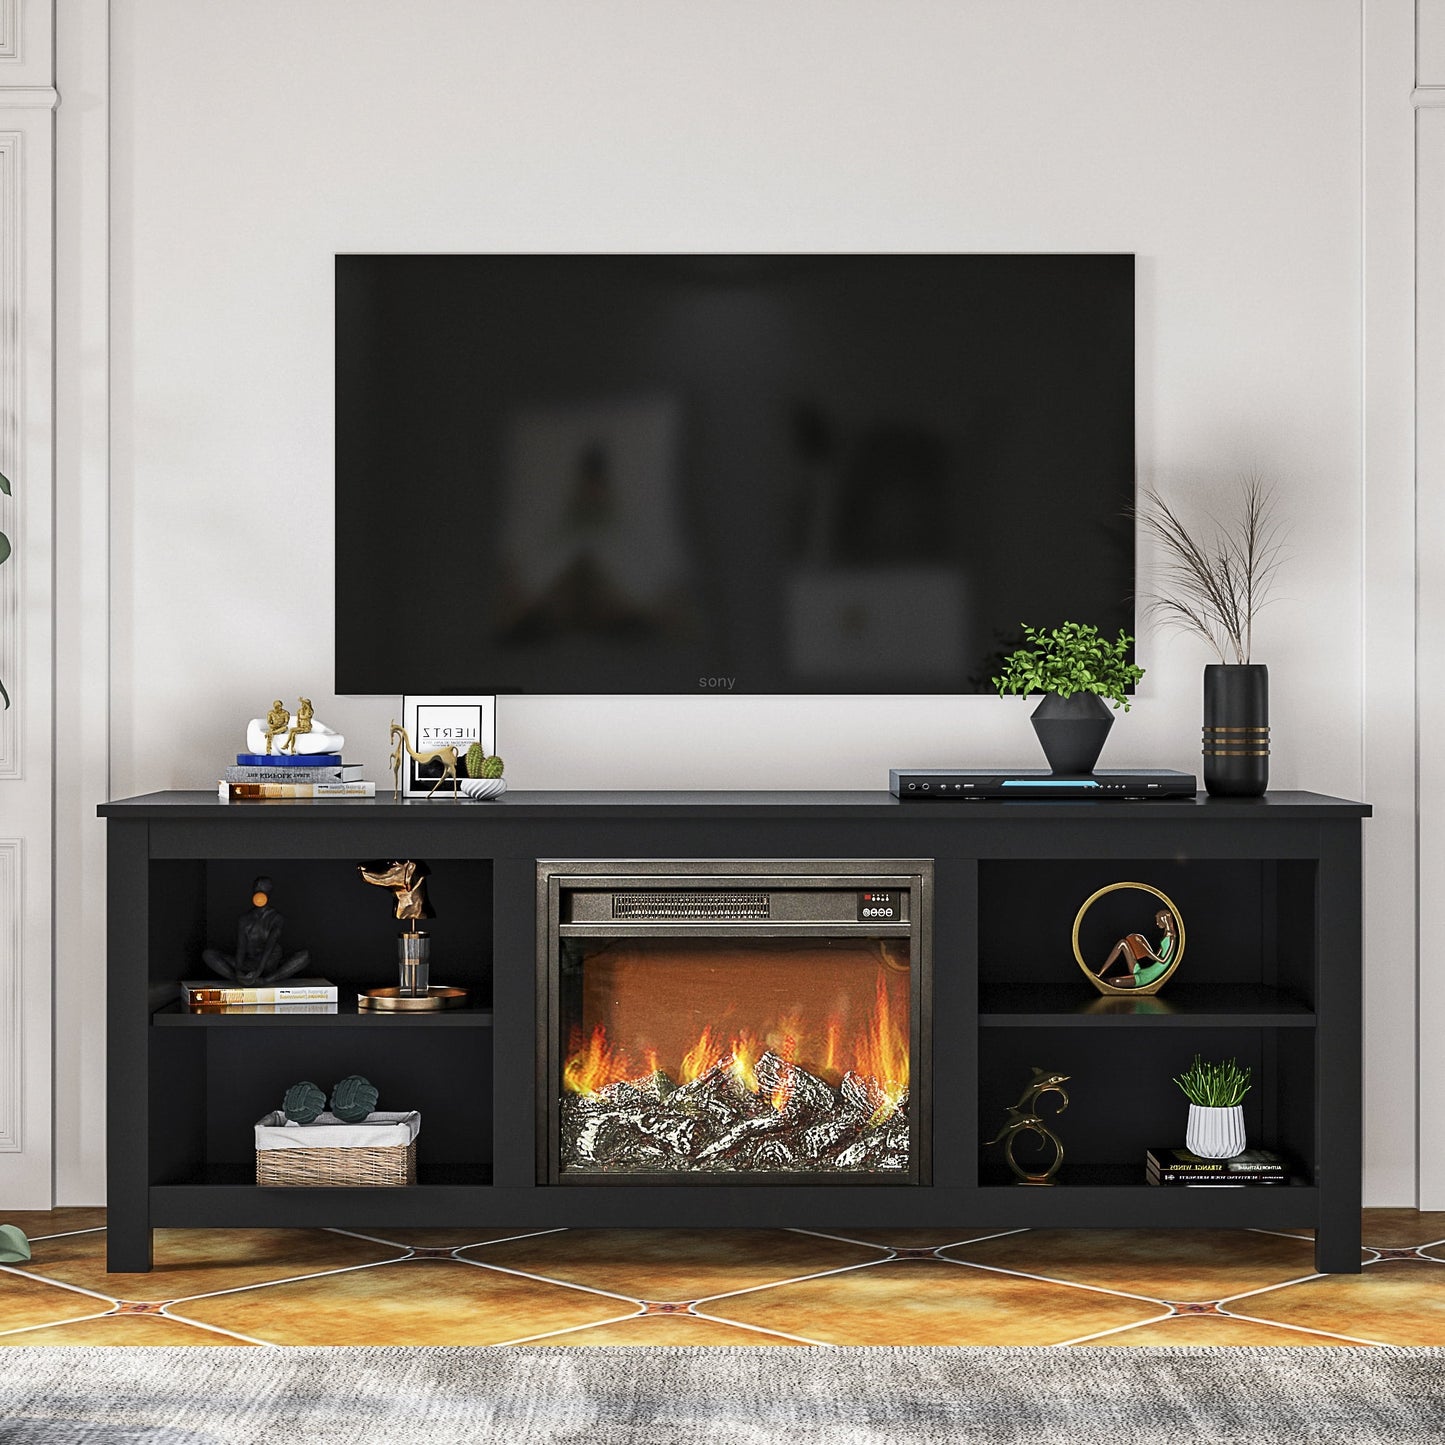 Fireplace TV Stand for TVs to 65 inch, TV Cabinet with Storage and Fireplace, Modern TV Stand for Living Room, Bedroom, Entertainment Console Cabinet, Espresso, D3187